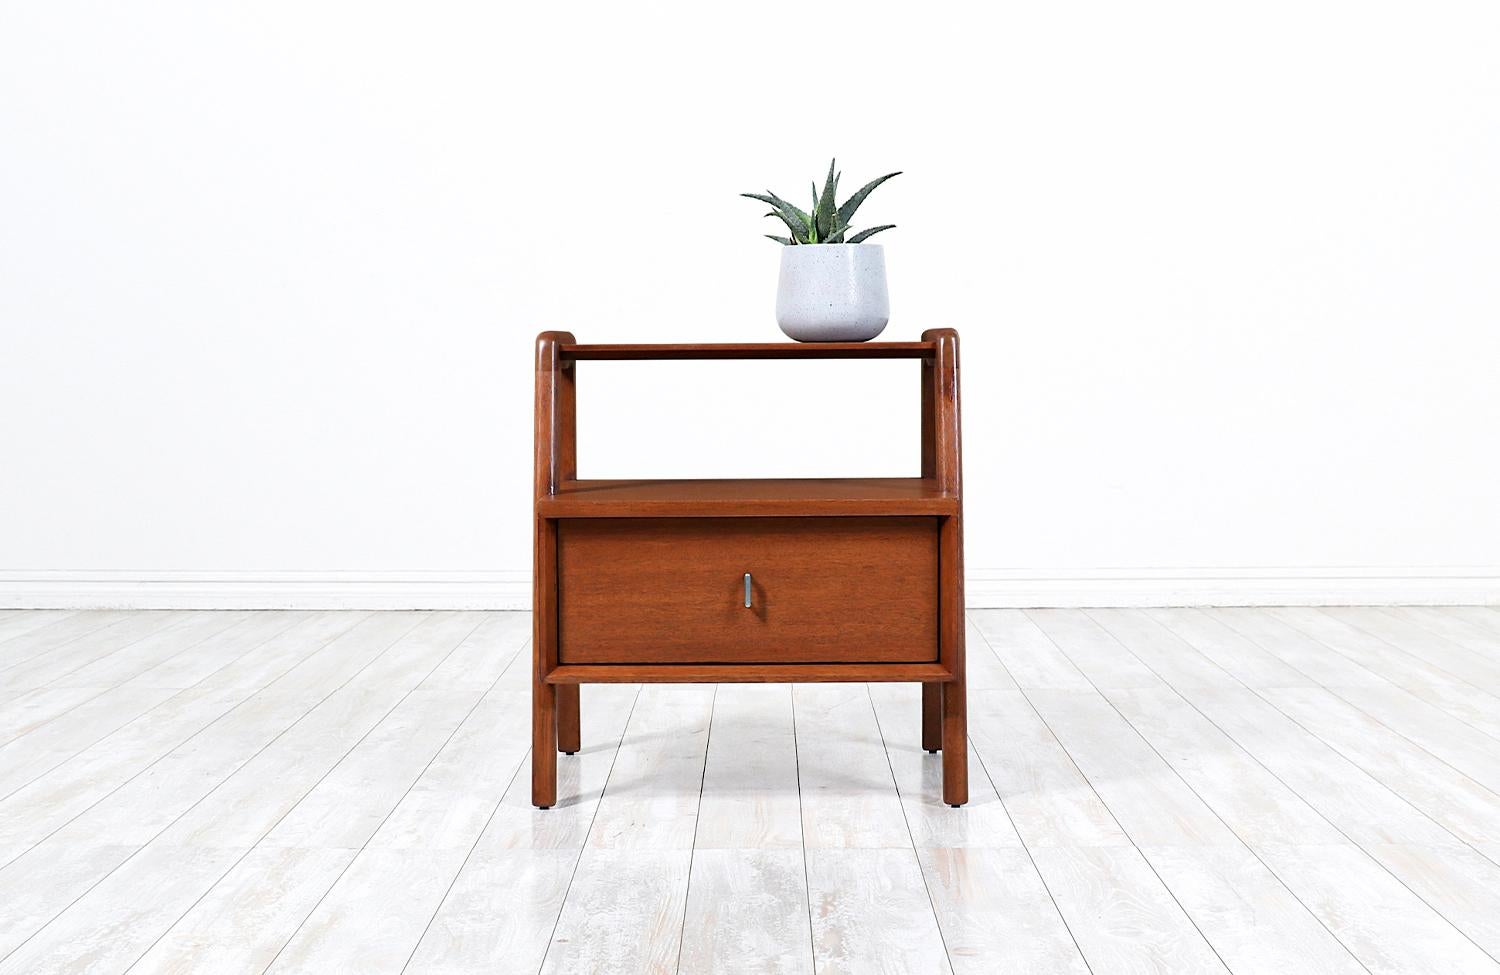 Elegant modern nightstand designed by John Keal for Brown Saltman in the United States circa 1950s. This fabulous nightstand is built on solid walnut-stained mahogany wood featuring a single sculpted drawer to store bedside essentials, with its